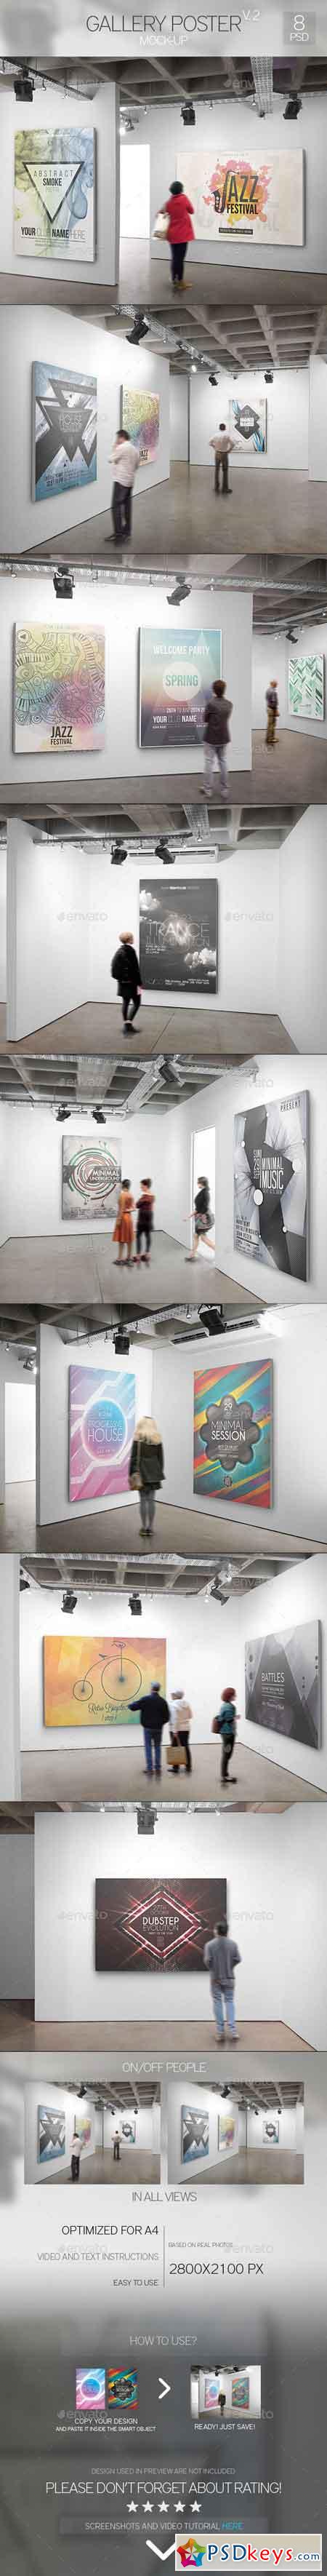 Gallery Poster Mock-Up 2 11064024